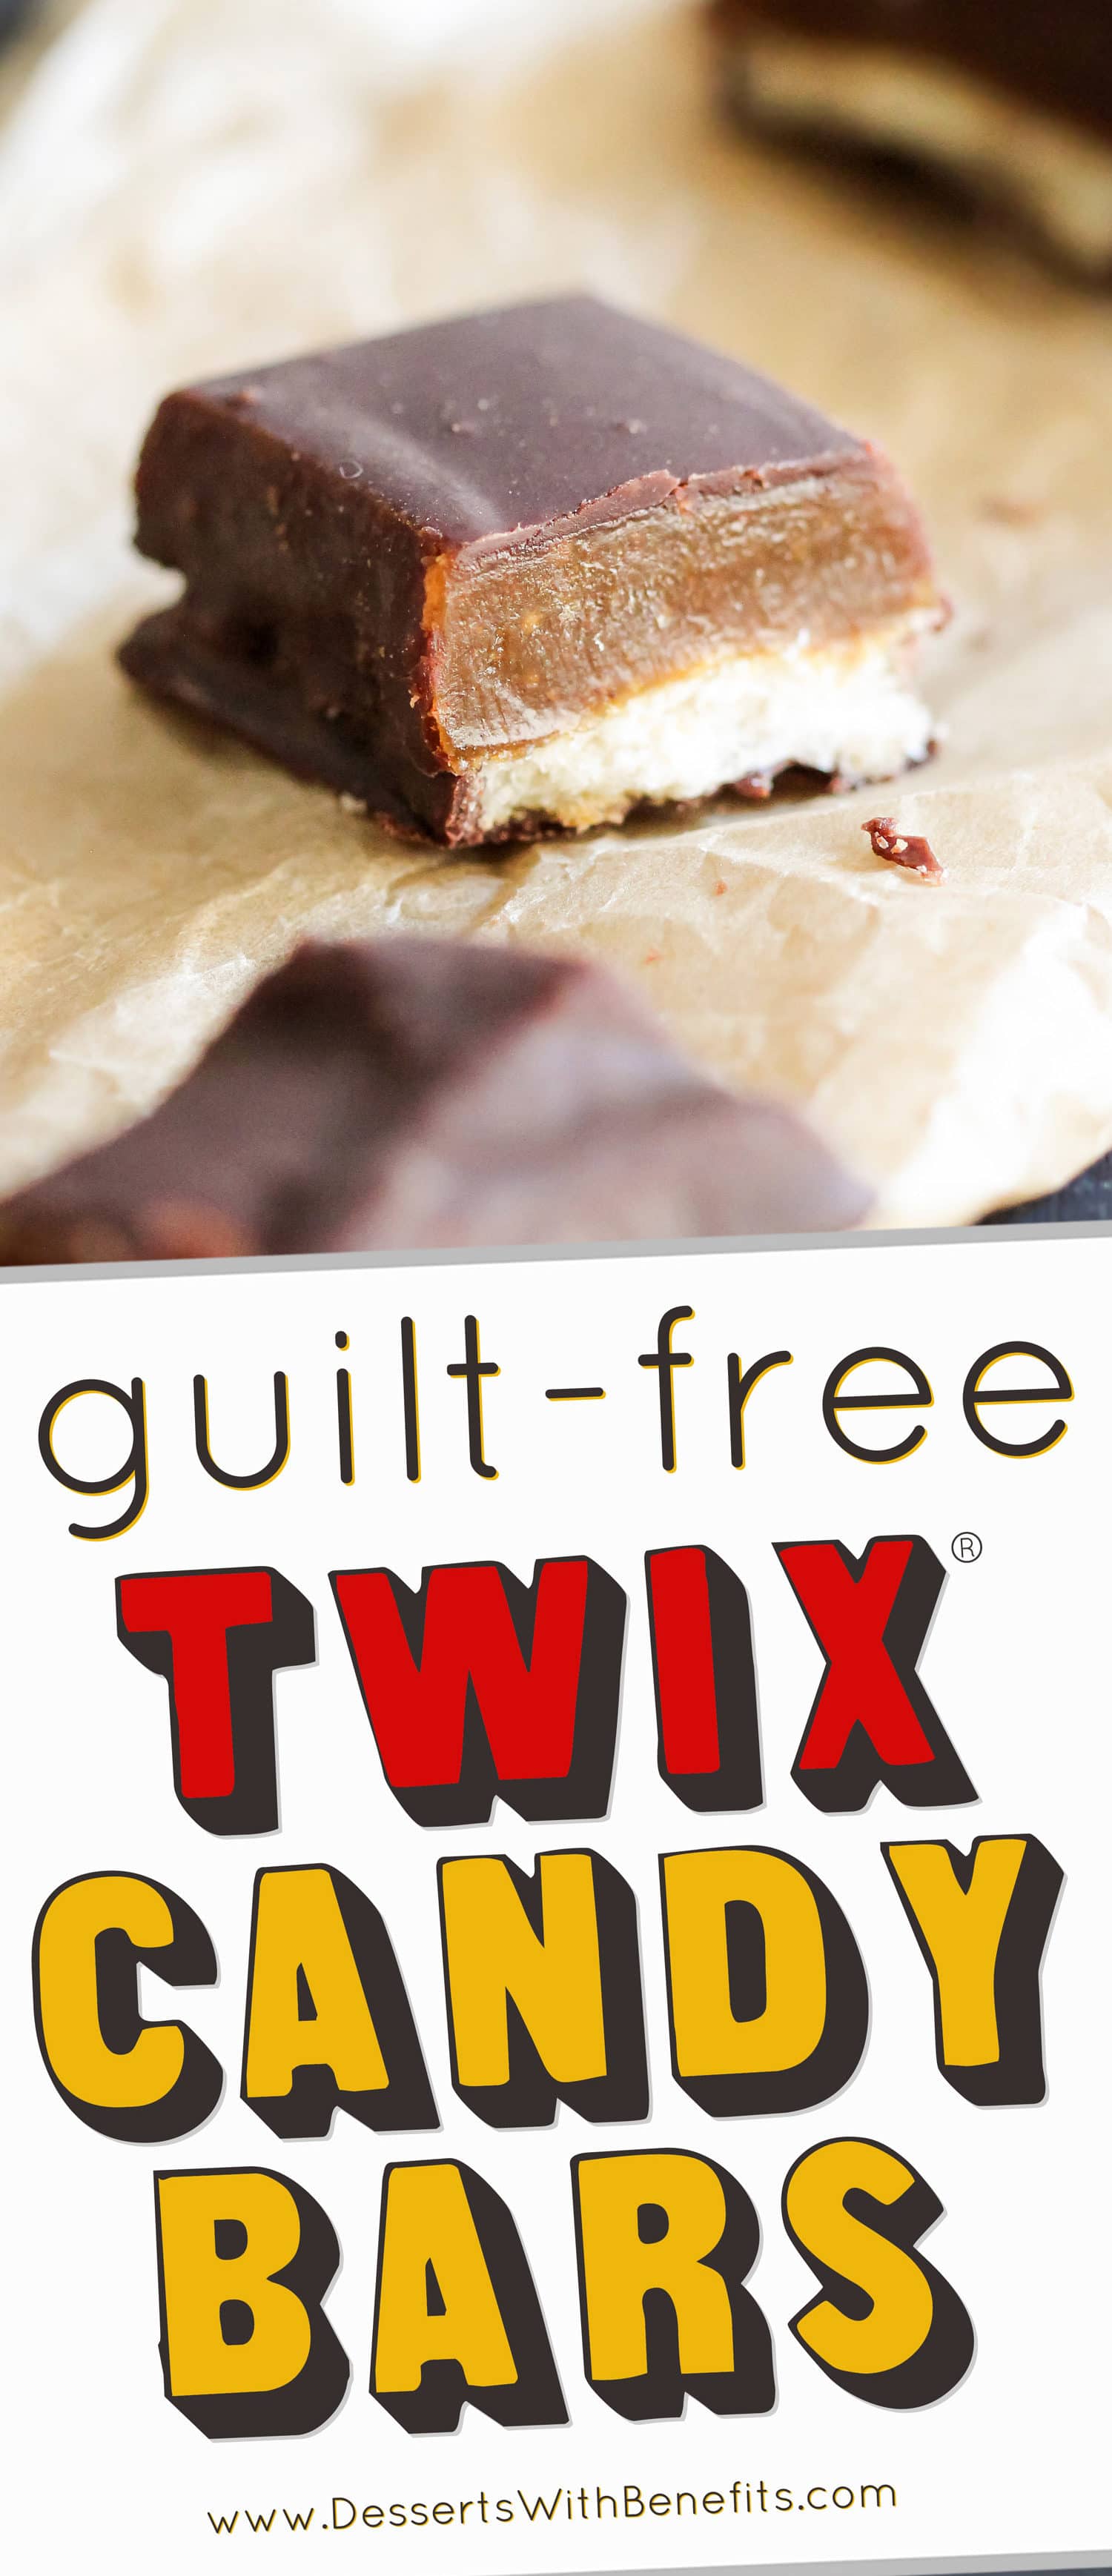 These guilt free homemade Twix candy bars are LIFE CHANGING. They taste just like the storebought kind, except these are all natural, vegan, dairy free, and reduced sugar. One bite and you'll think you're eating something full of sugar, fat, and calories, but you're not! Healthy Dessert Recipes with sugar free, low calorie, low fat, high protein, and gluten free options at the Desserts With Benefits Blog (www.DessertsWithBenefits.com)